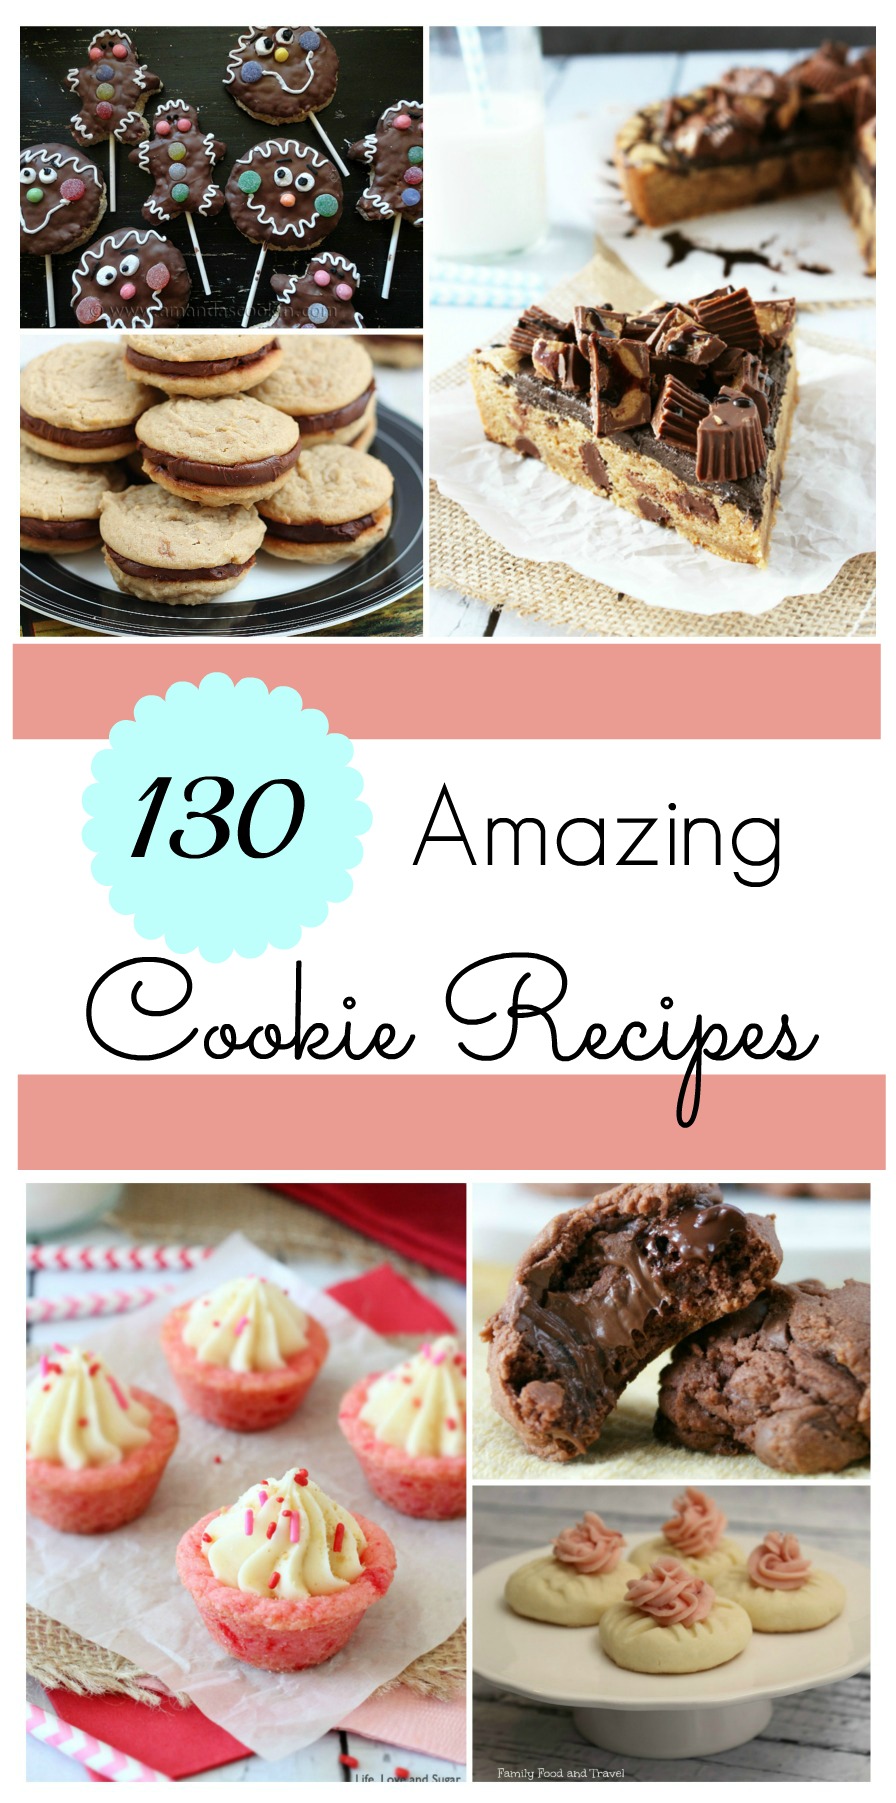 130 Amazing Cookie Recipes | Budget Earth